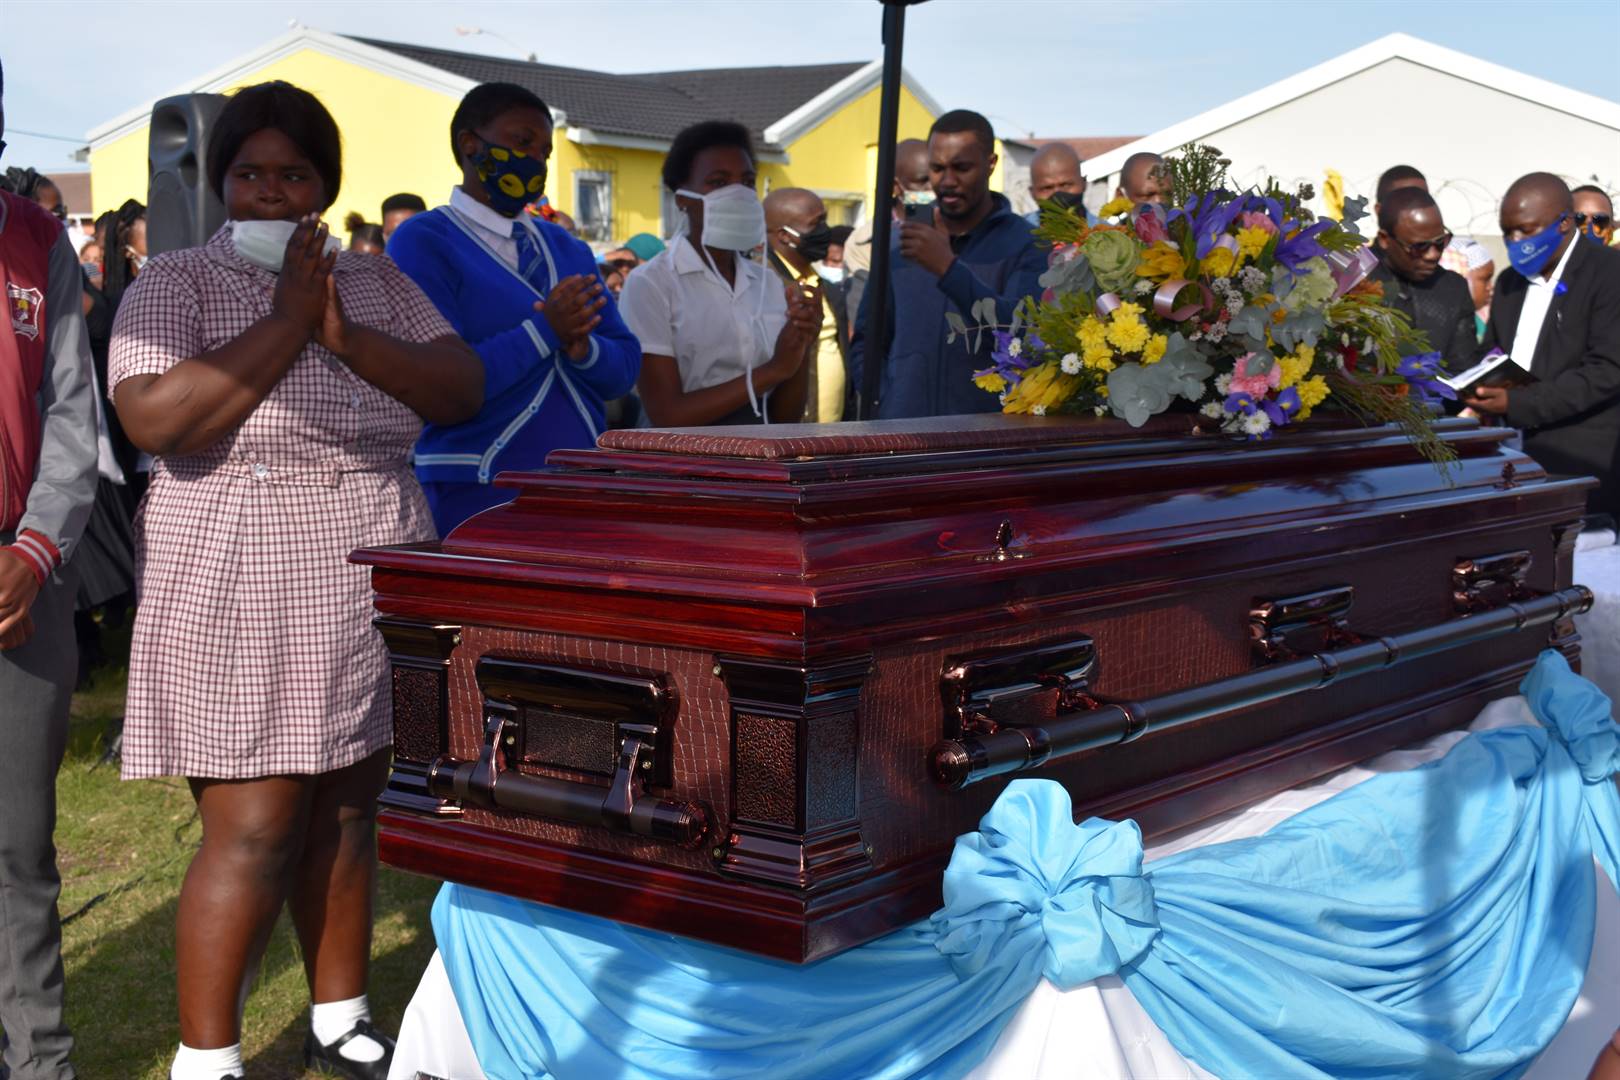 The community members came to pay their last respects to Amahle Quku, who will be buried in the Eastern Cape tomorrow. Photo by Bulelwa Mbadamane